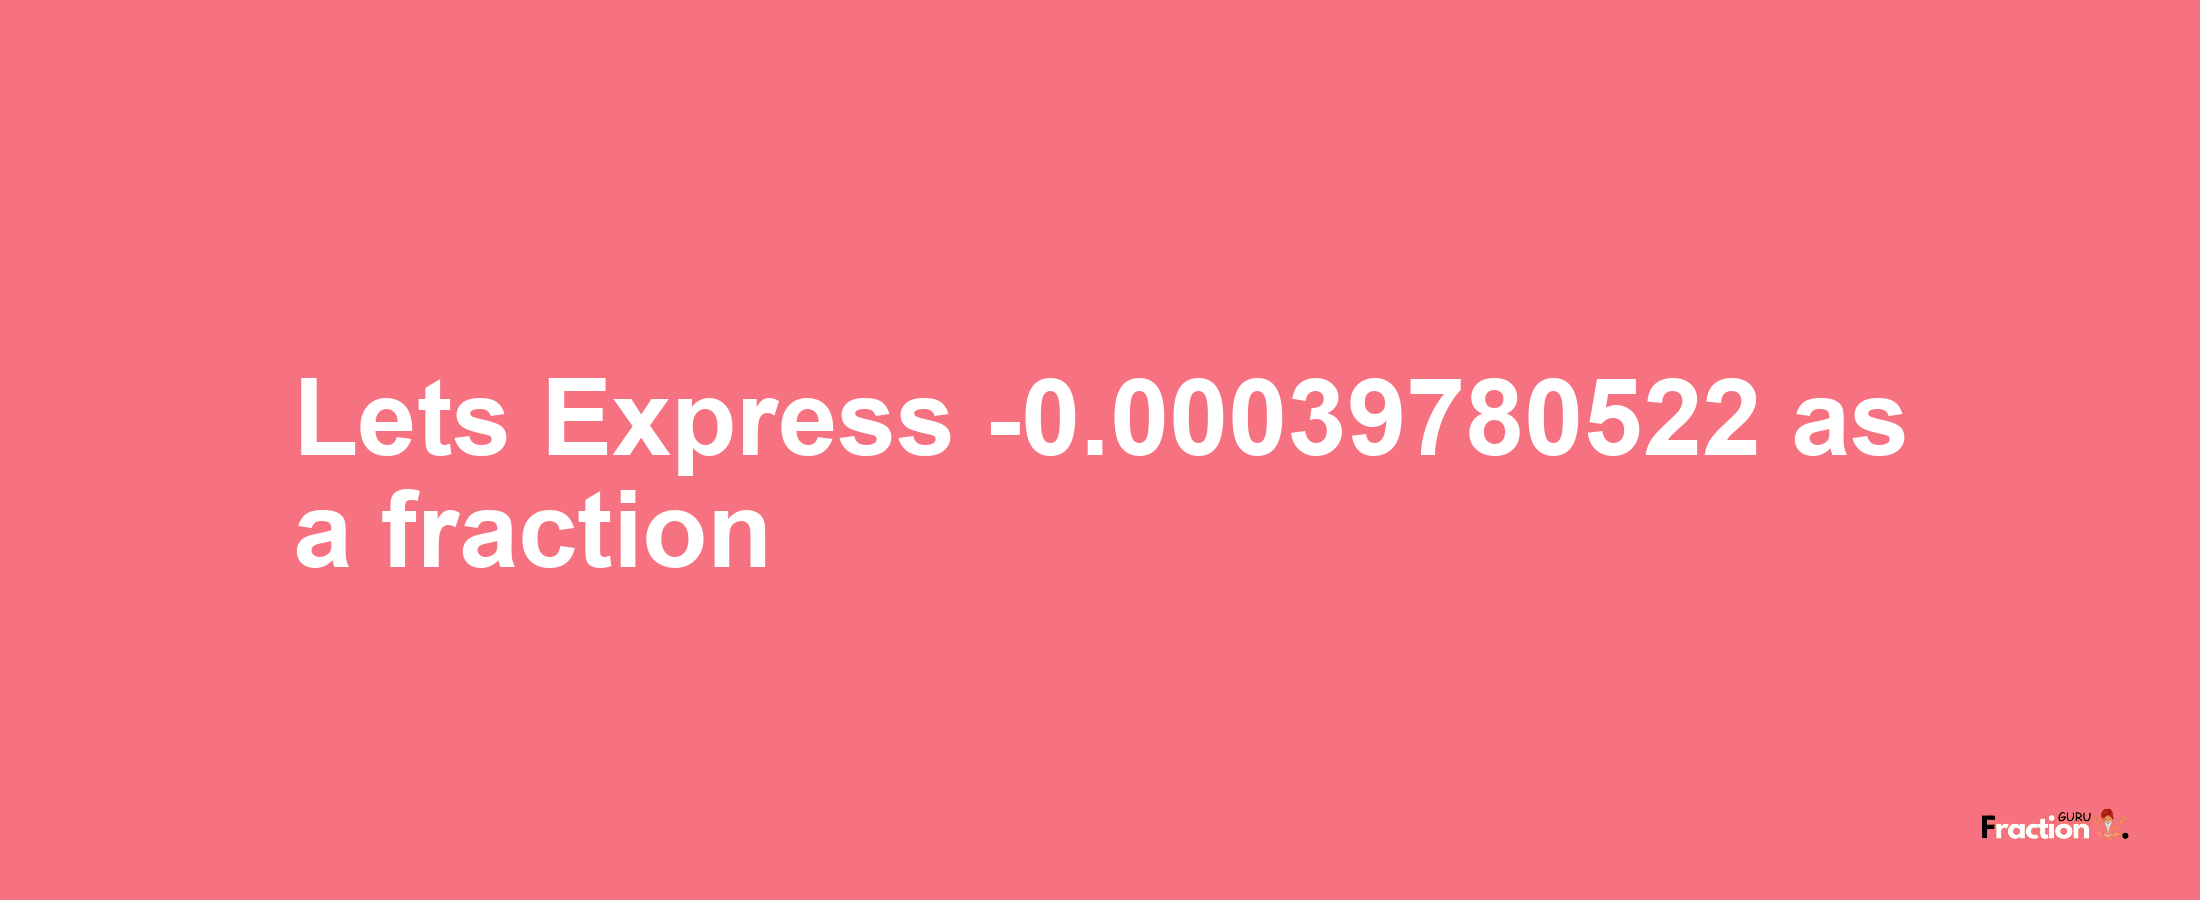 Lets Express -0.00039780522 as afraction